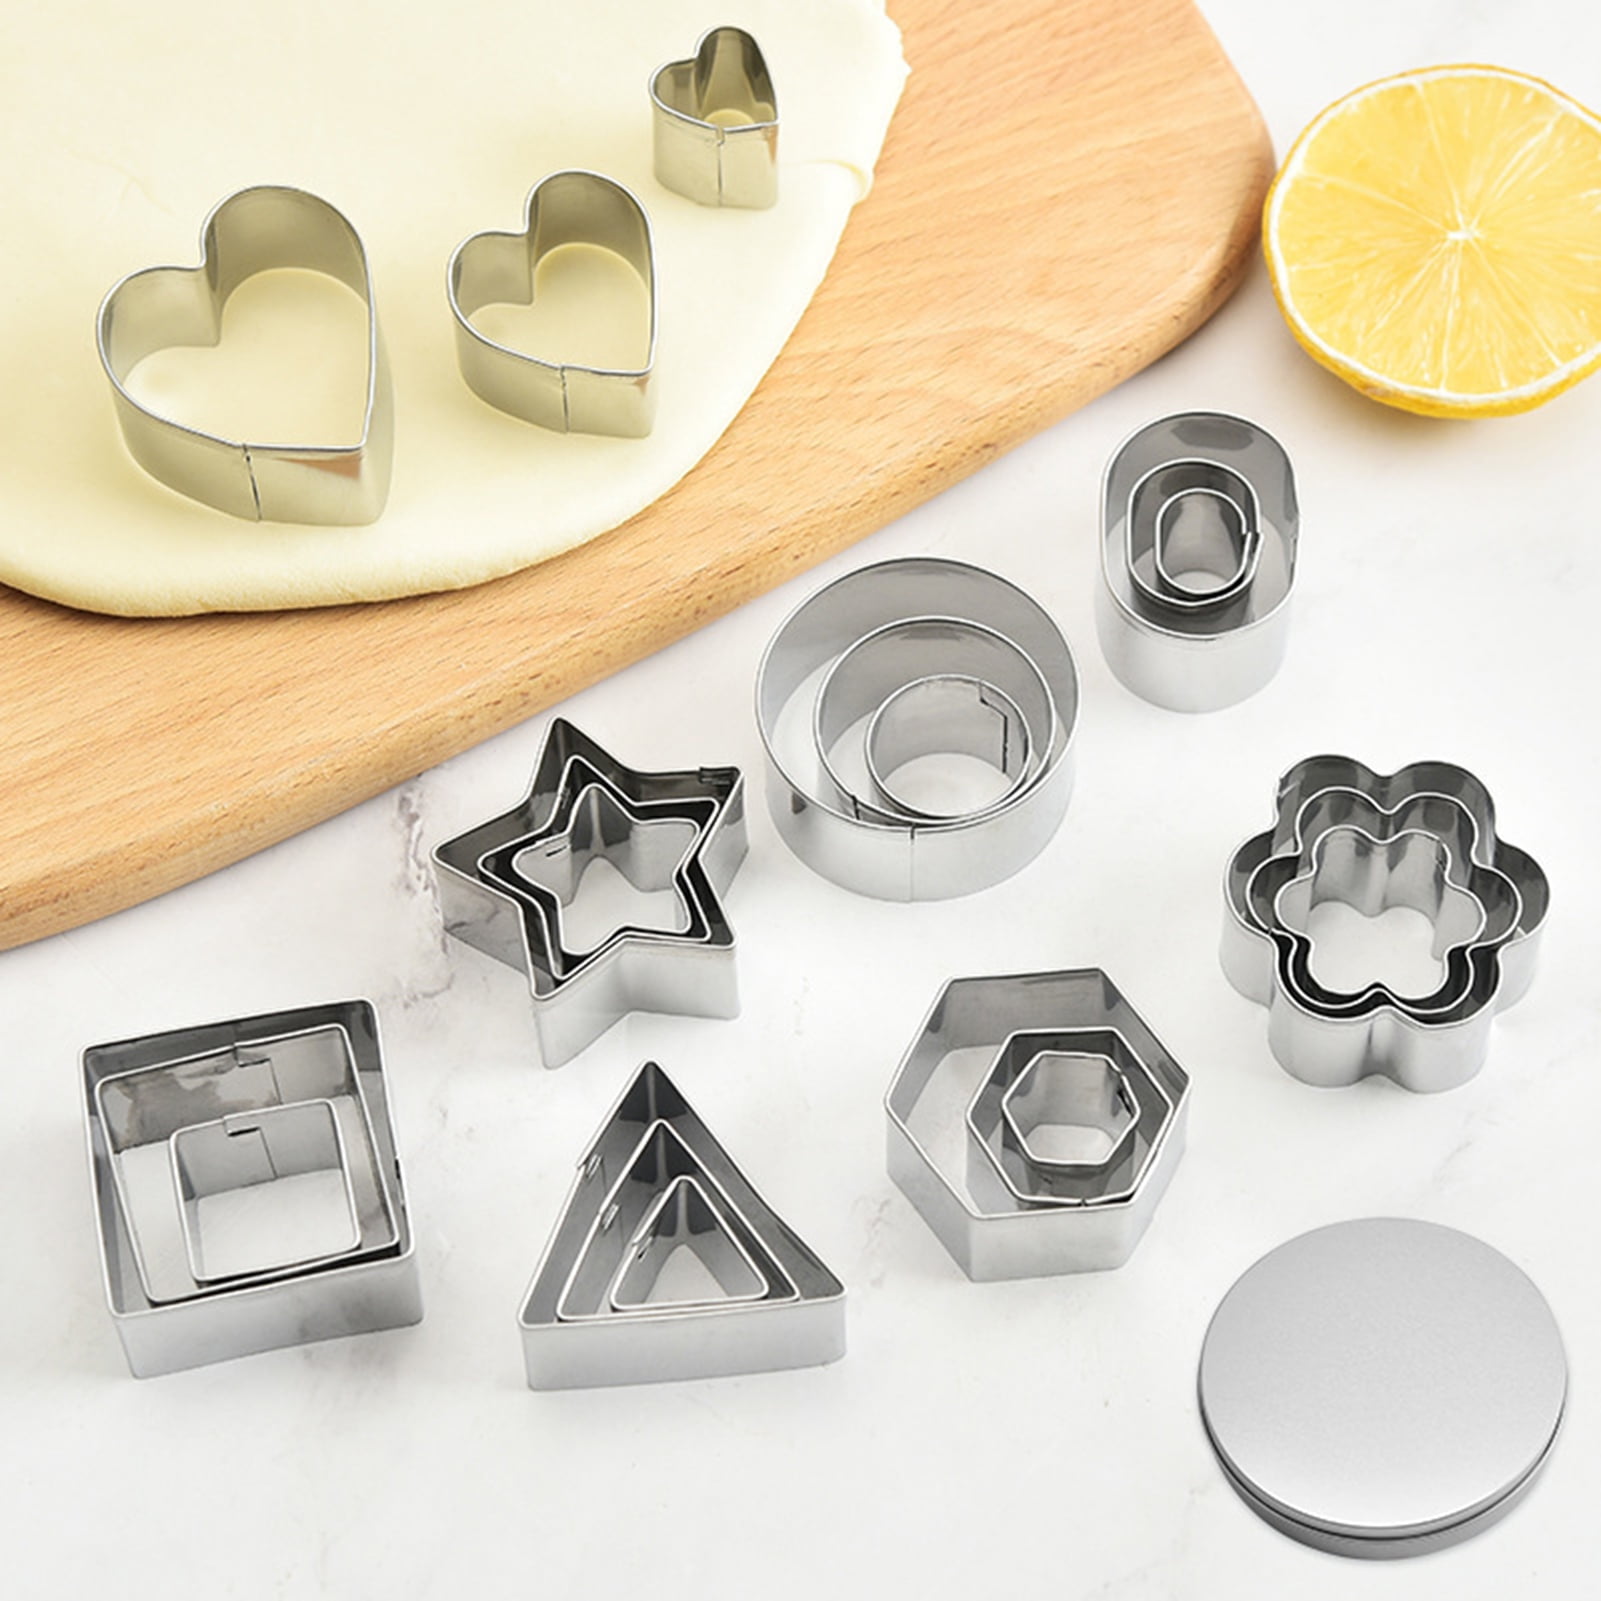 DflowerK 24 Mini Cookie Cutters Shapes Set Biscuit Cutters Stainless Steel  Metal Baking Molds for Pastry Dough Donut Fruit Fondant Clay